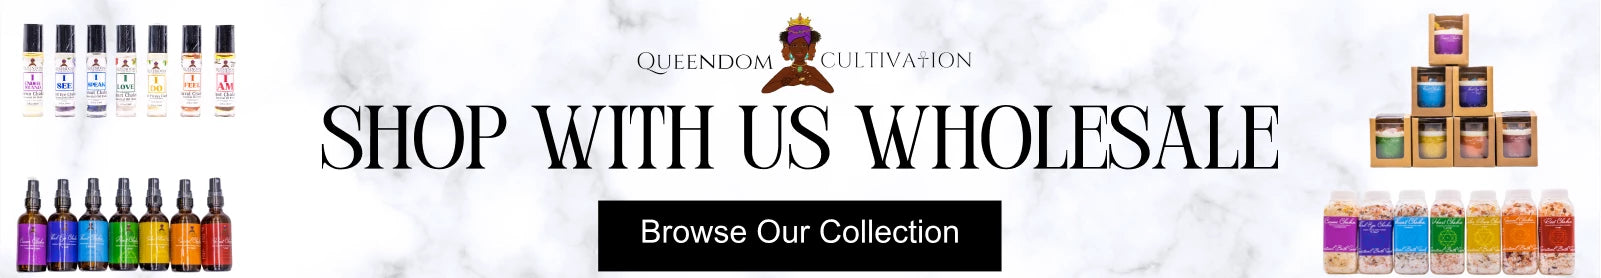 Queendom Cultivation - Browse our Wholesale Collection